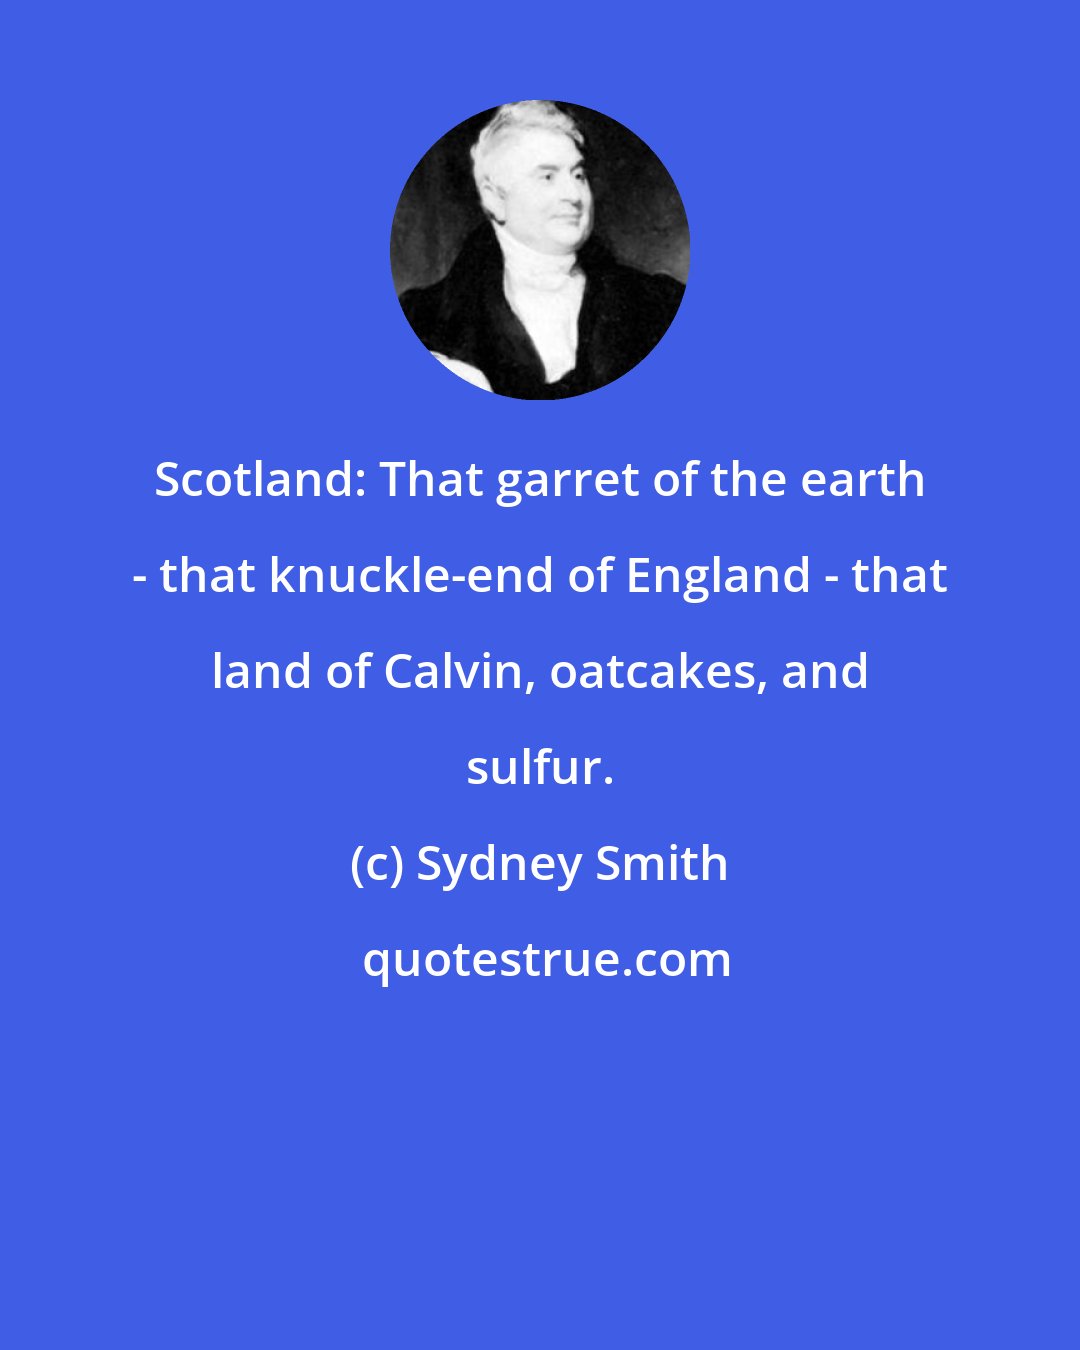 Sydney Smith: Scotland: That garret of the earth - that knuckle-end of England - that land of Calvin, oatcakes, and sulfur.